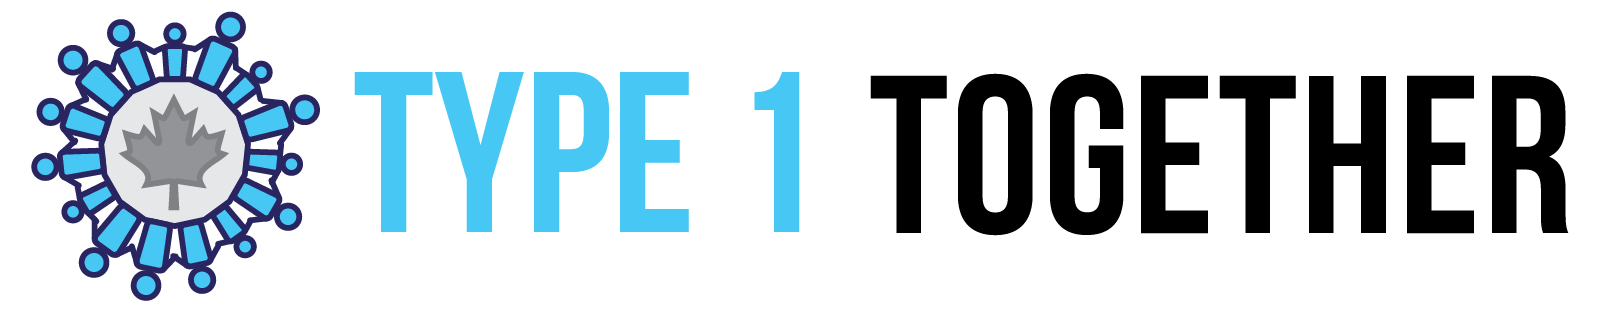 Type 1 Together logo and banner.  Logo shows 15 blue human shapes, in small, medium, and tall sizes, holding hands around the perimeter of 15-sided polygon.  The interior of the polygon is grey, with a grey Canadian maple in the centre.